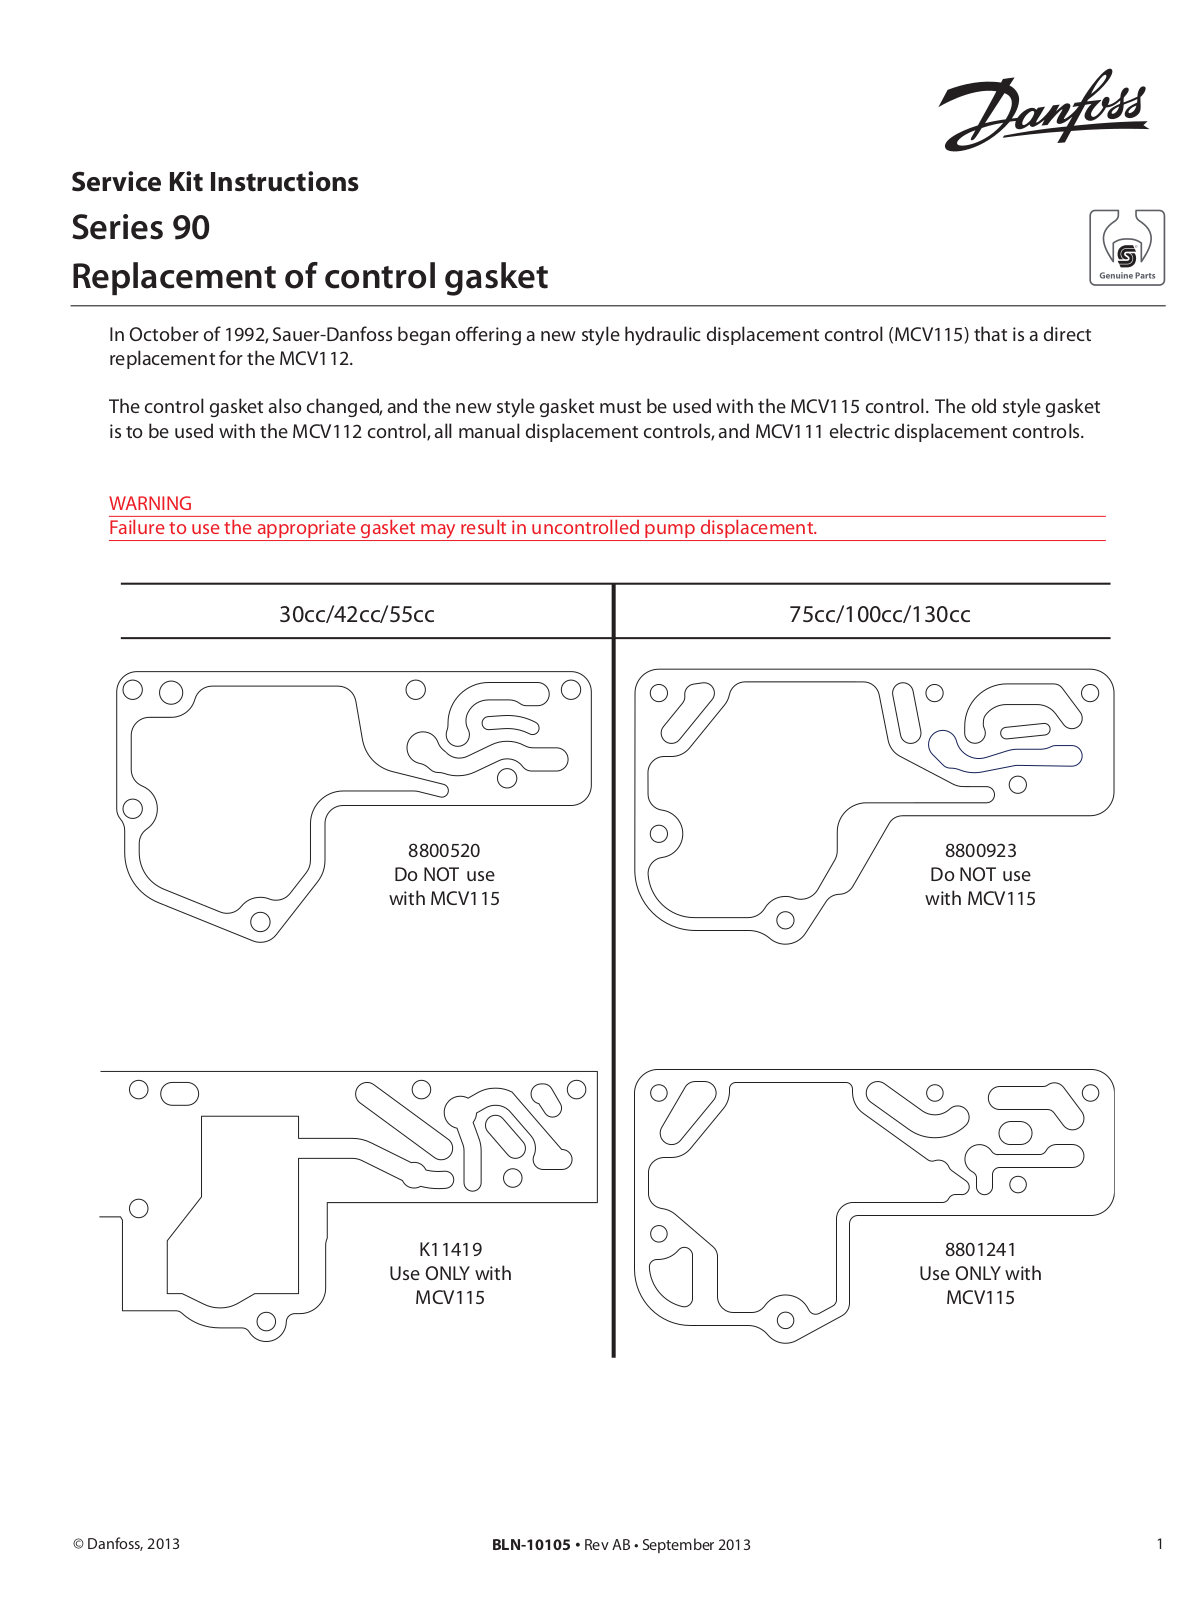 Danfoss Replacement of control gasket Installation guide